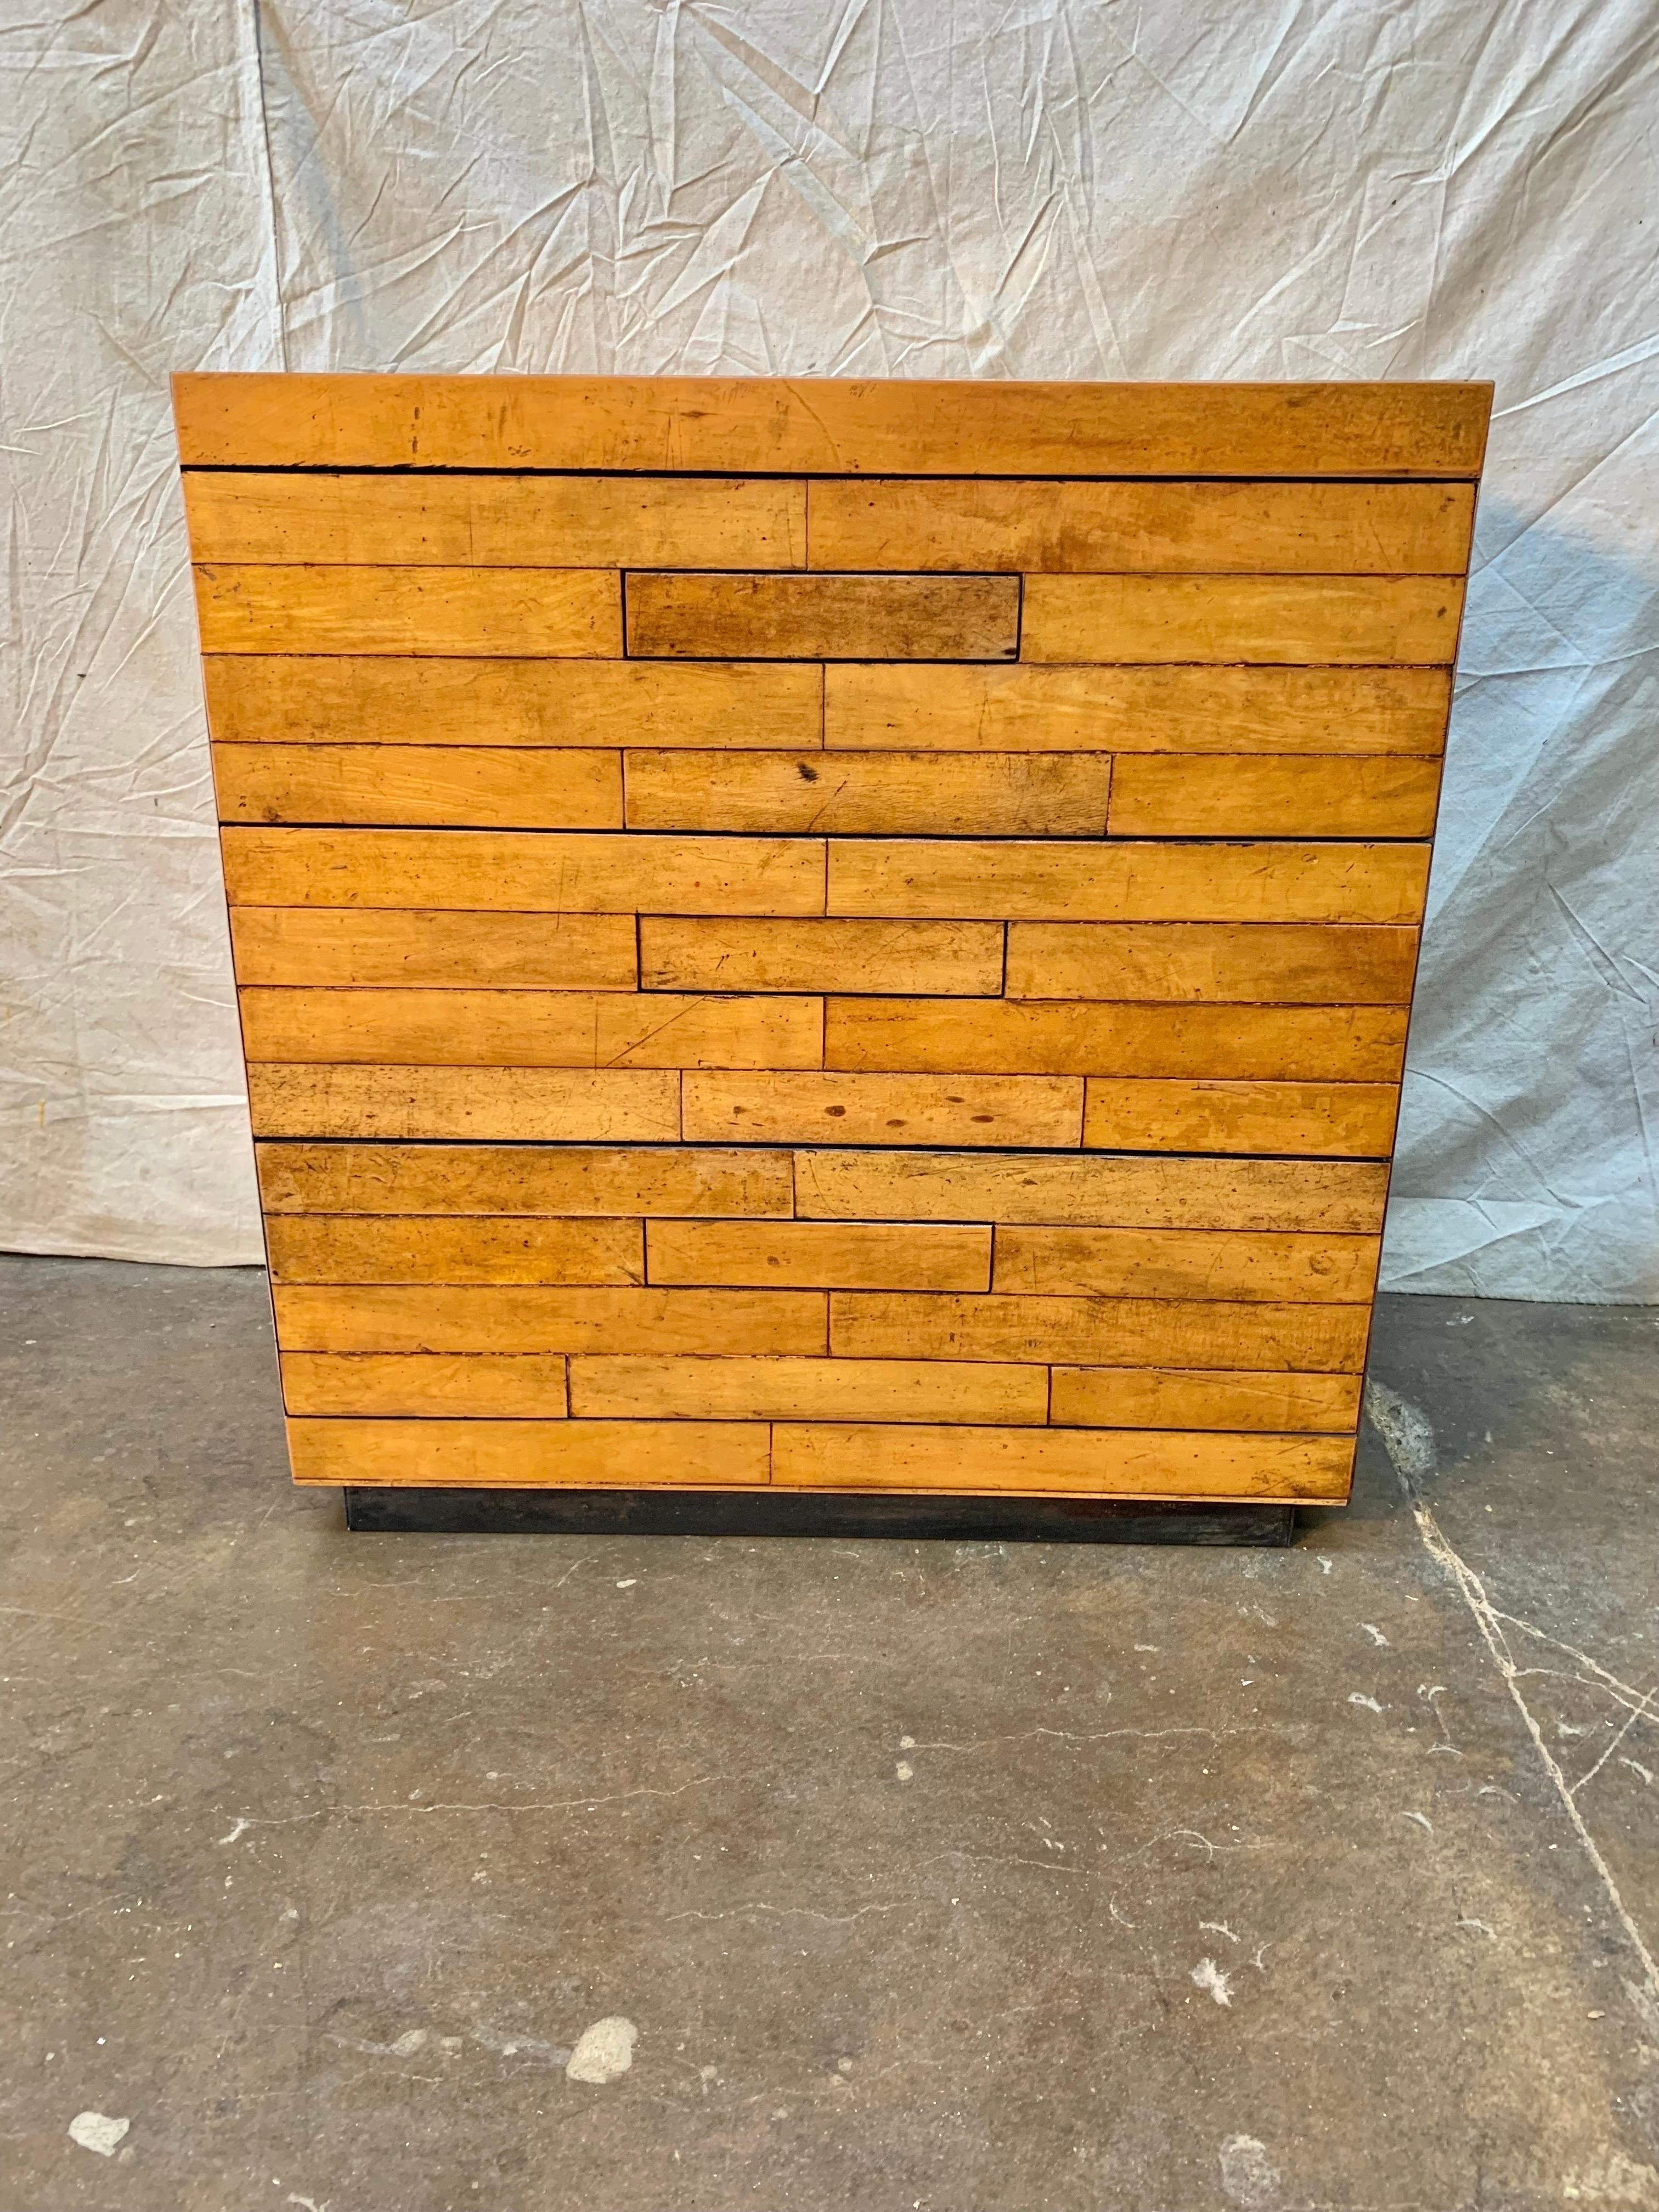 This Early 21st Century Timothy Oulton Chest of Drawers was made using reclaimed old English boarding school gym floors. The three drawer chest features hidden pulls which blend in seamlessly with the drawer facade. The drawers are easily operable